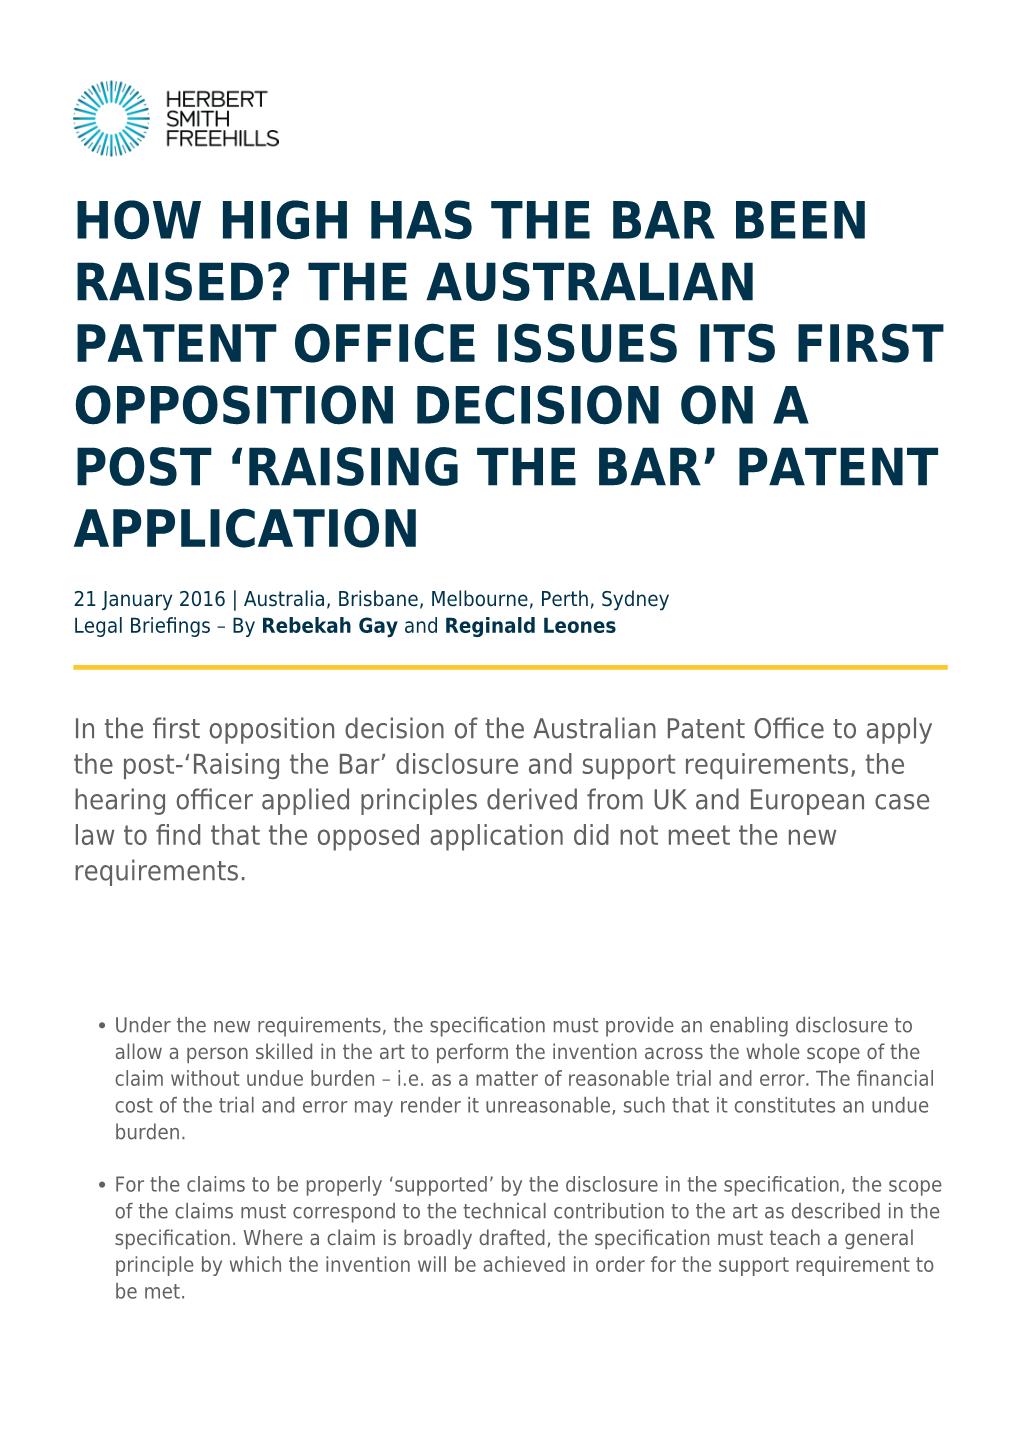 How High Has the Bar Been Raised? the Australian Patent Office Issues Its First Opposition Decision on a Post ‘Raising the Bar’ Patent Application